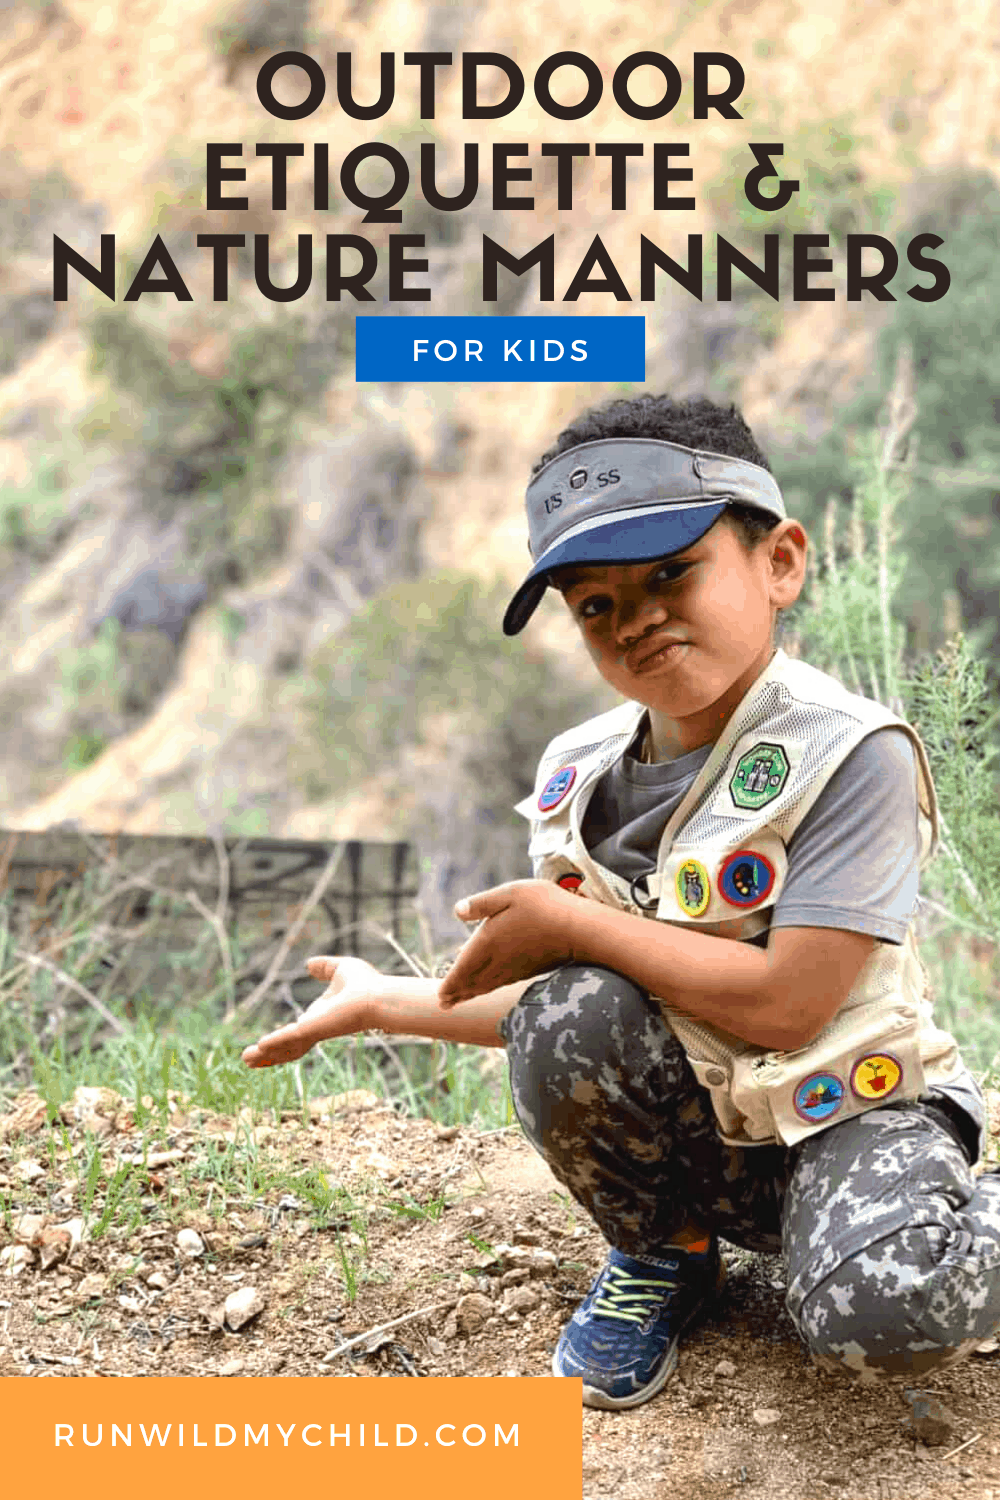 Outdoor Etiquette & Nature Manners for Kids